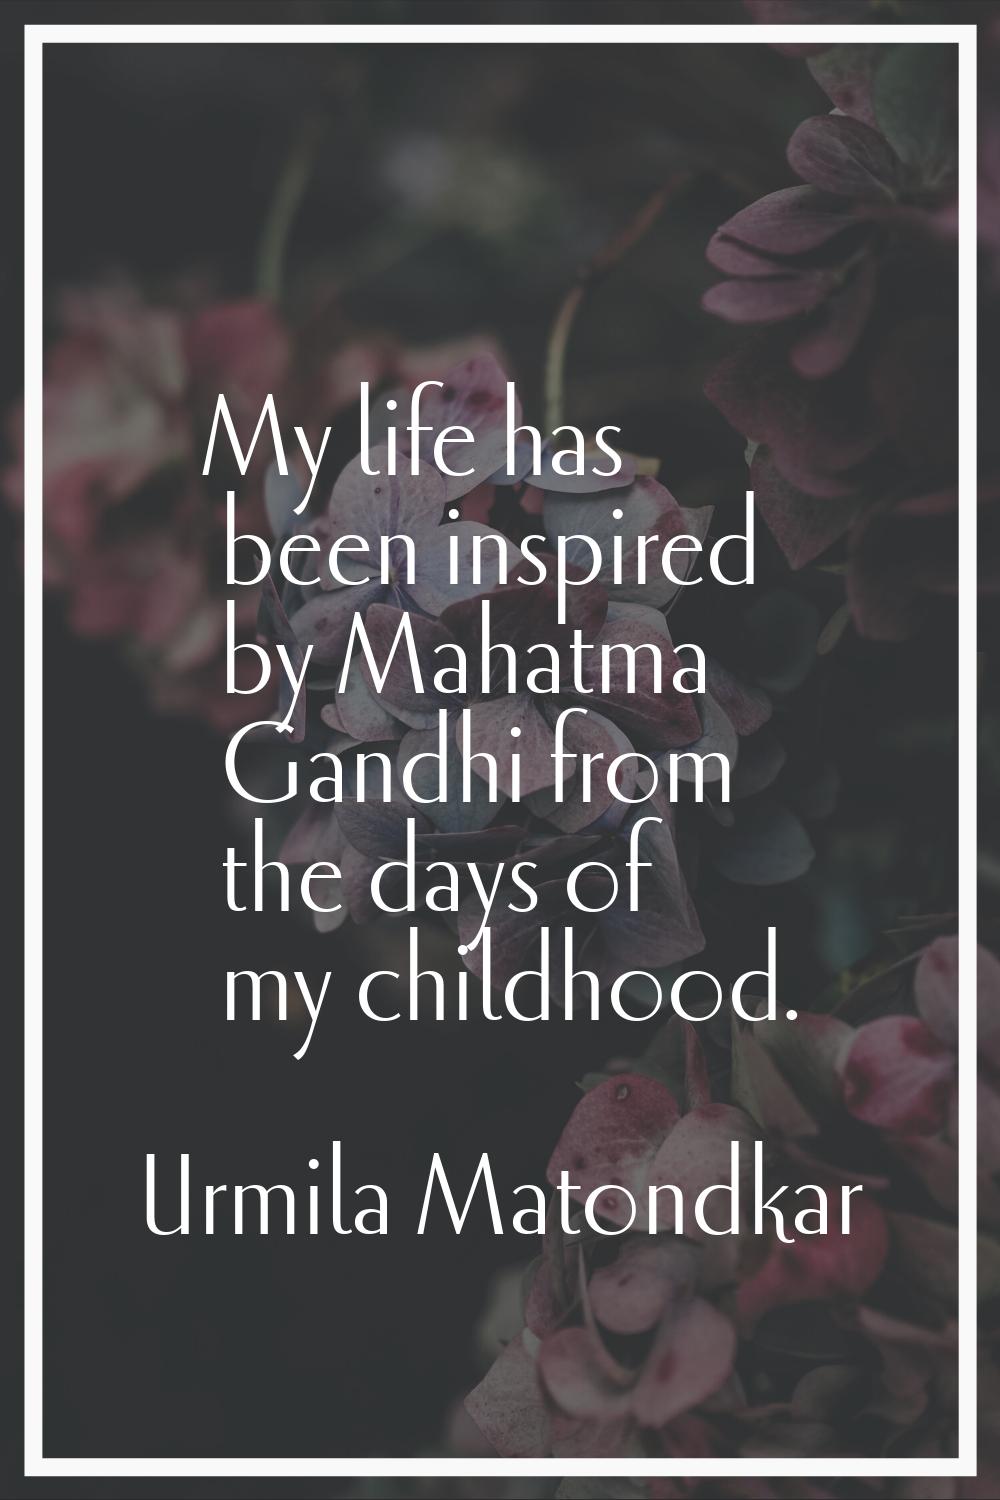 My life has been inspired by Mahatma Gandhi from the days of my childhood.